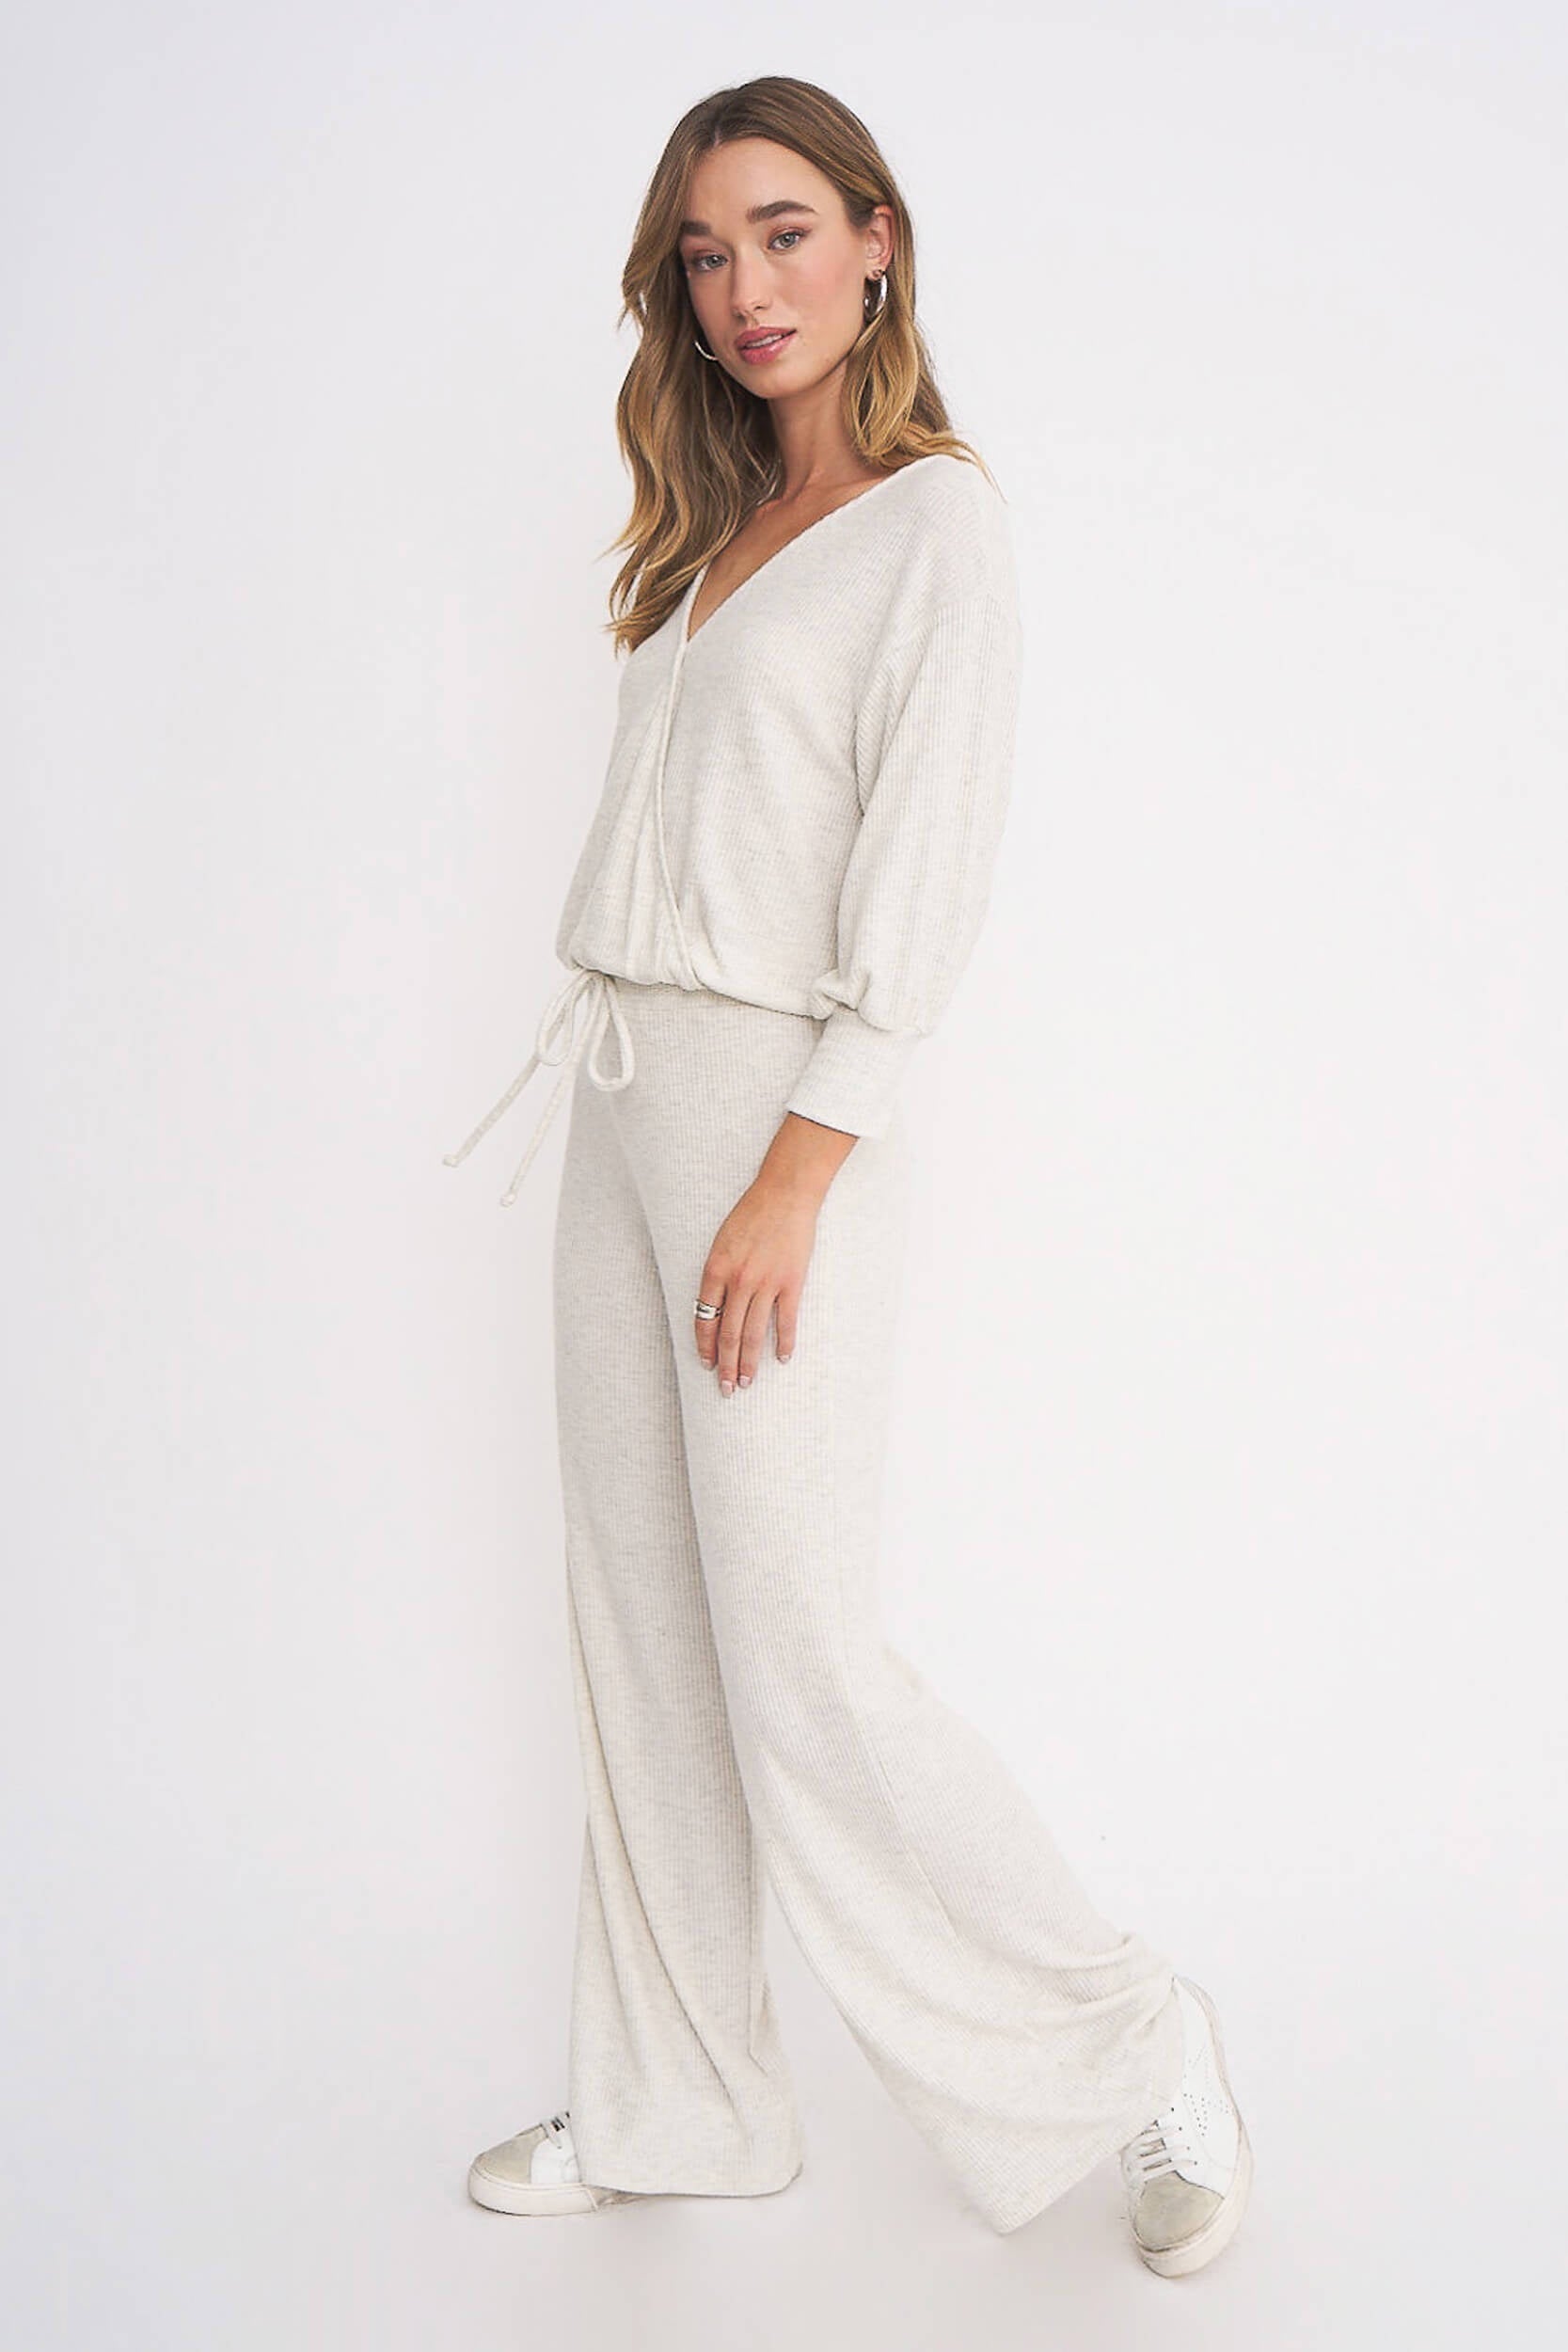 Solid Color Wrap Pants, Lightweight and Flowy Wrap Around Pants